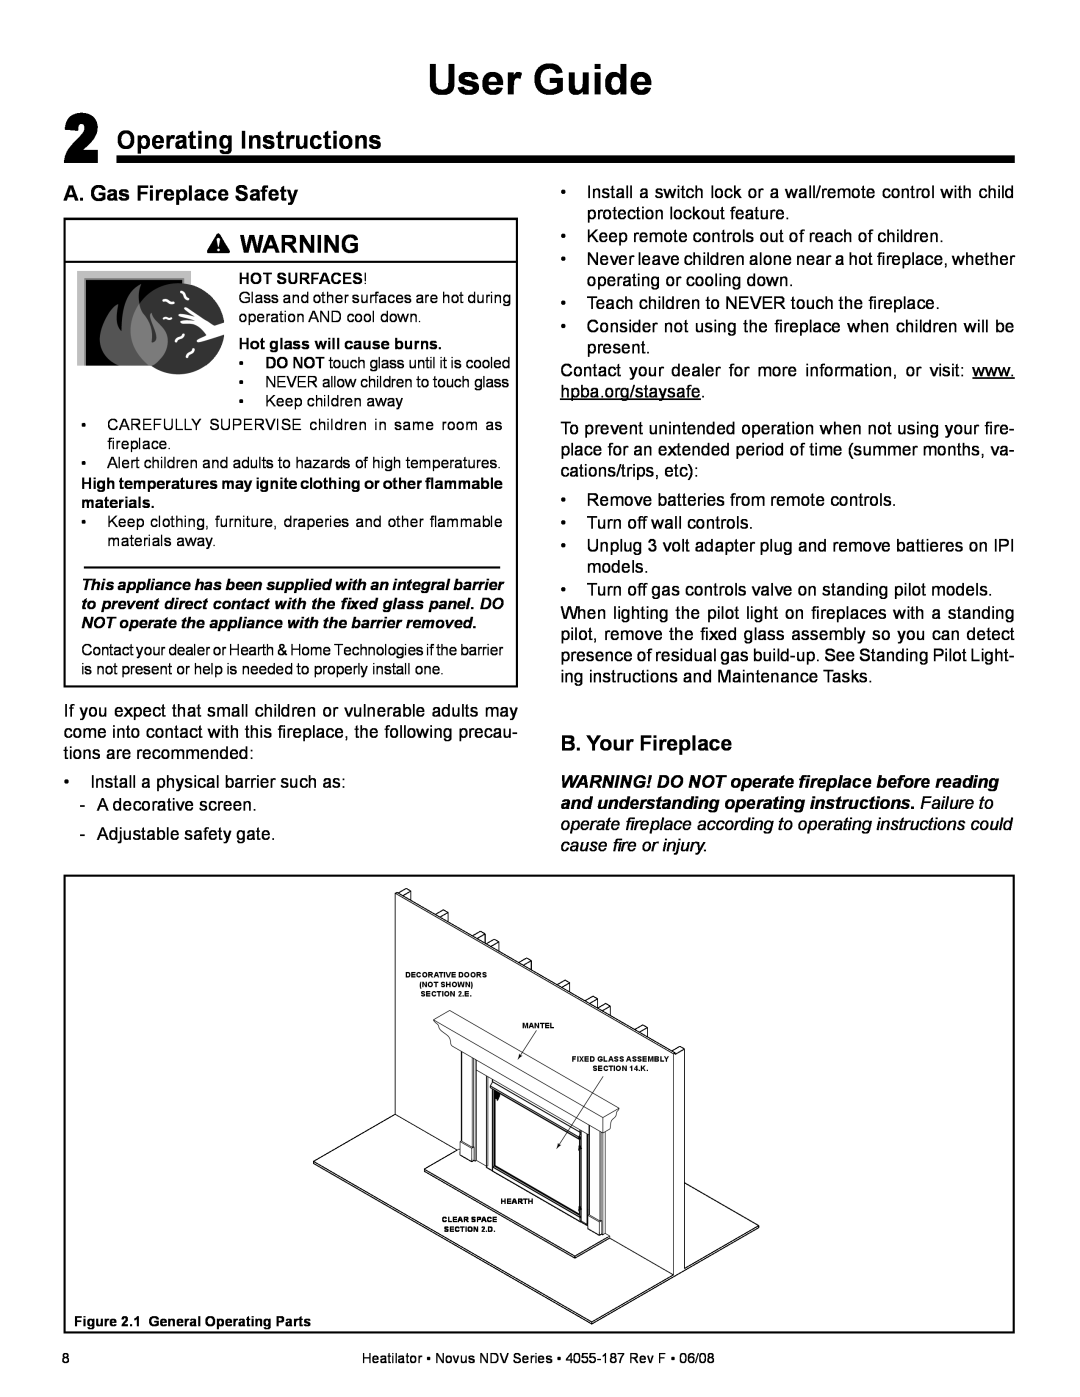 Hearth and Home Technologies NDV4236L User Guide, Operating Instructions, A. Gas Fireplace Safety, B. Your Fireplace 